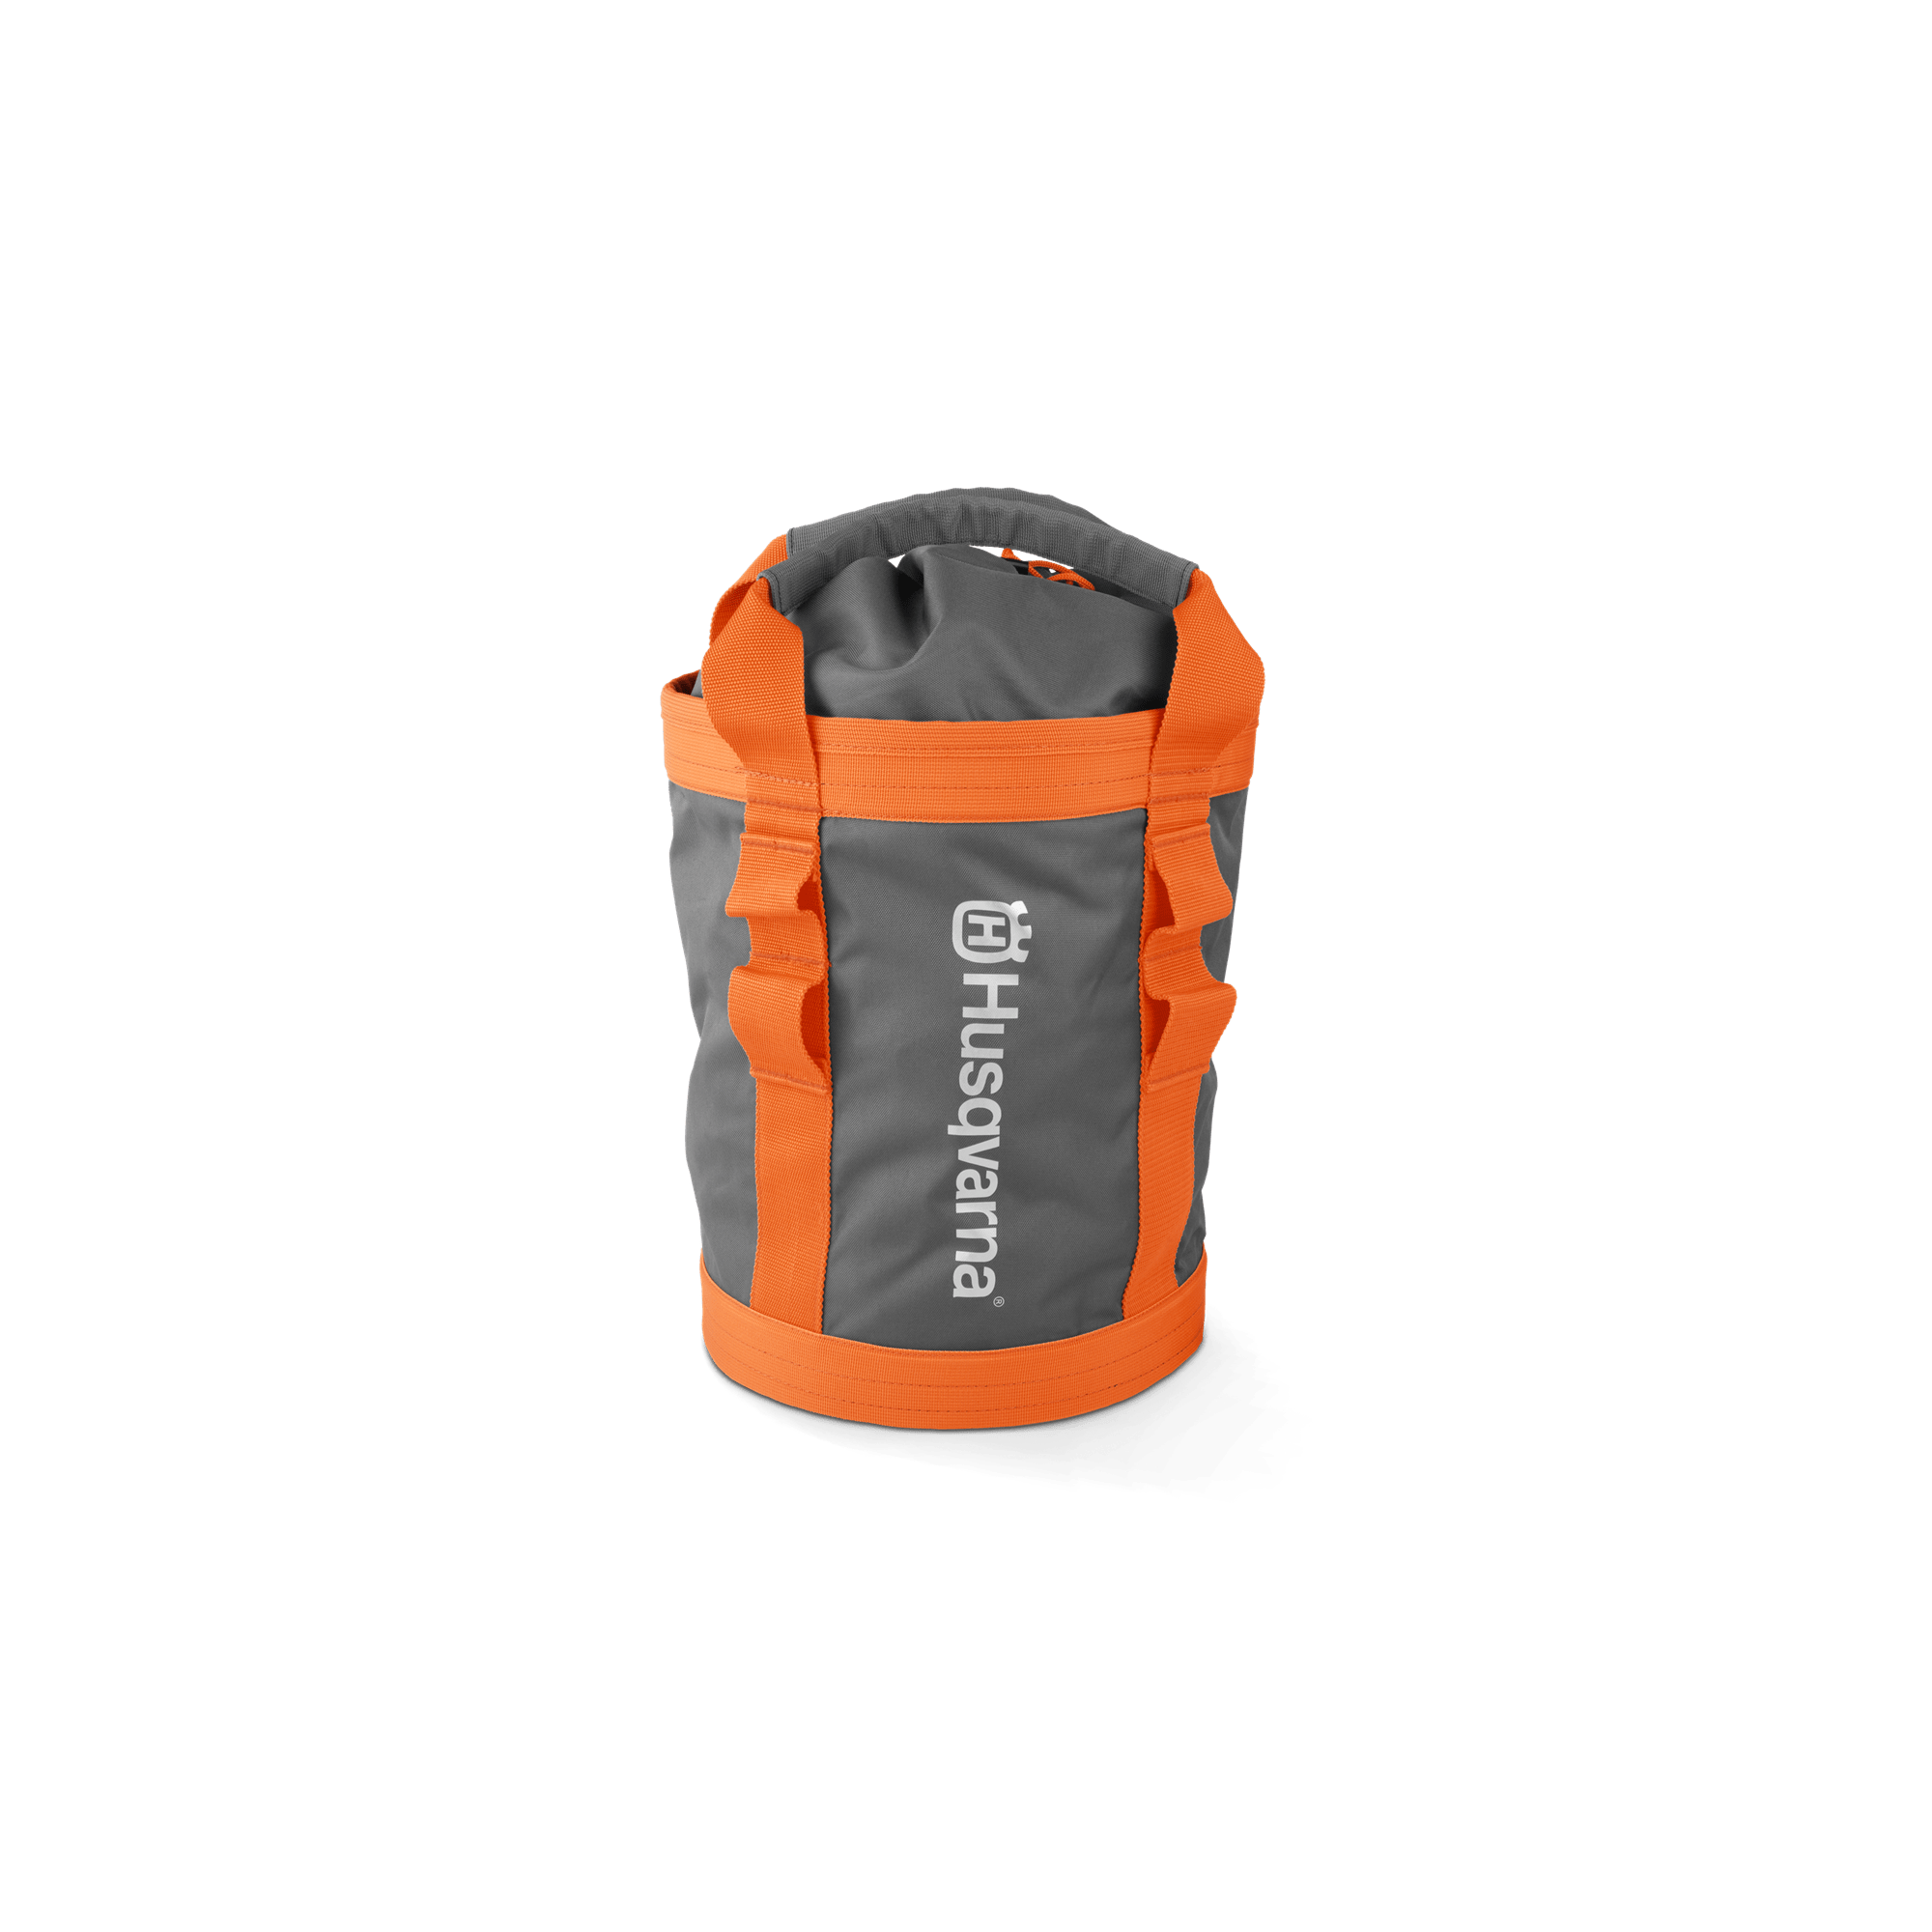 Image for Rope Bag                                                                                                                         from HusqvarnaB2C